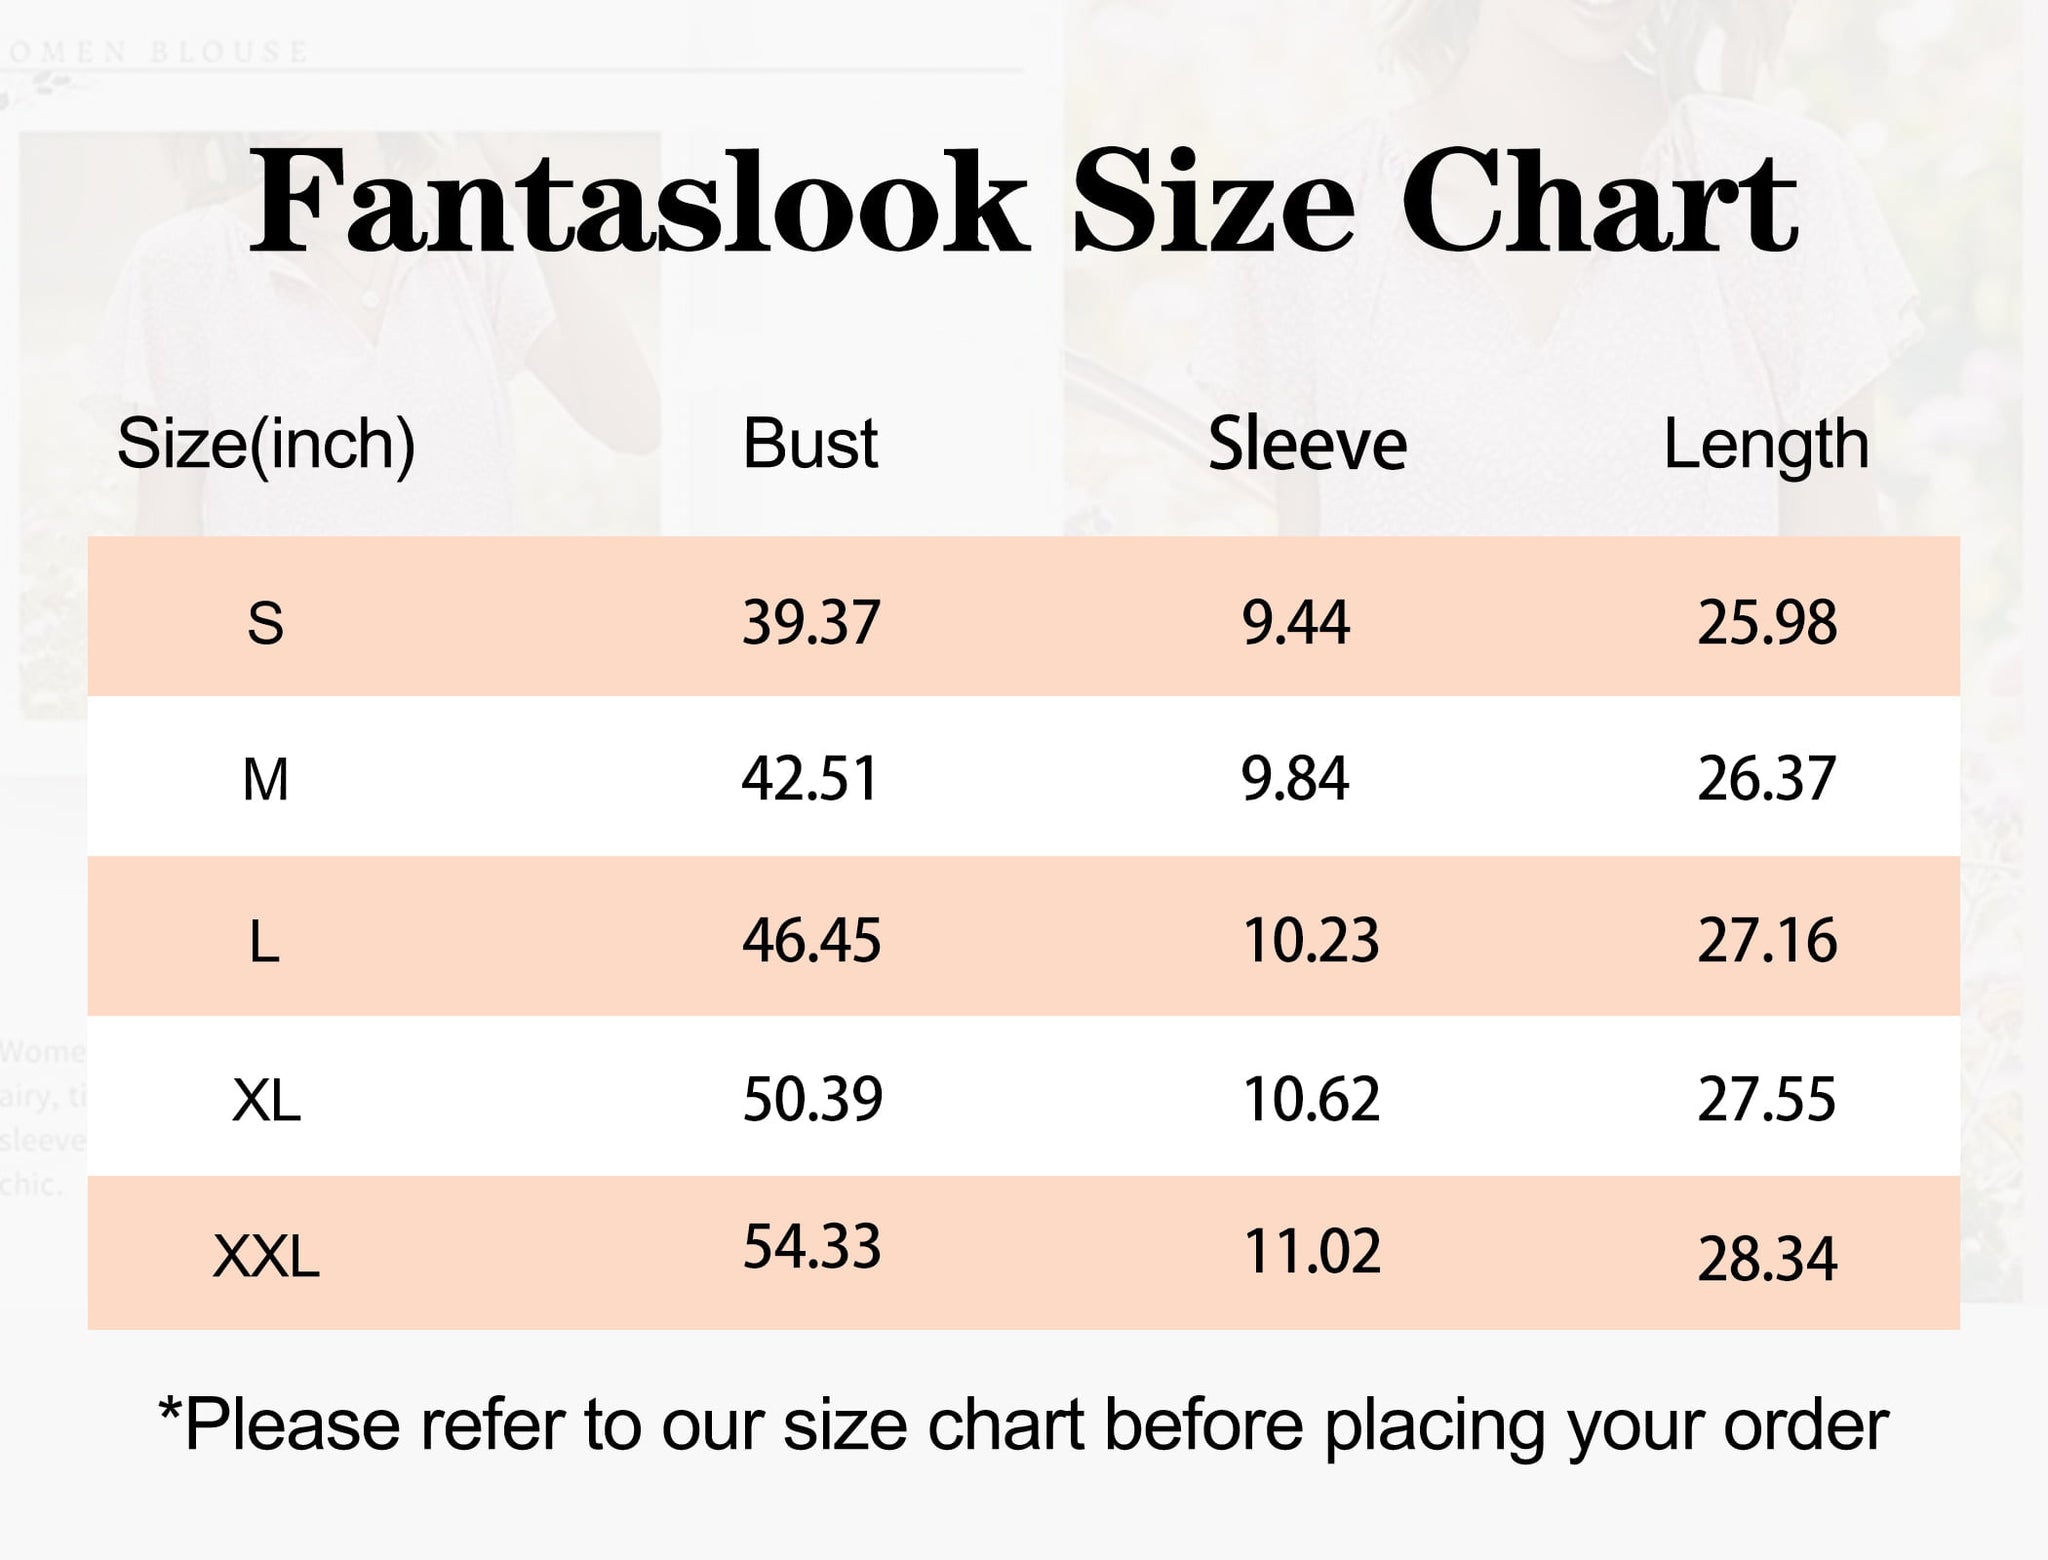 Fantaslook Blouses for Women Floral Print V Neck Ruffle Short Sleeve Shirts Casual Summer Tops - image 6 of 6